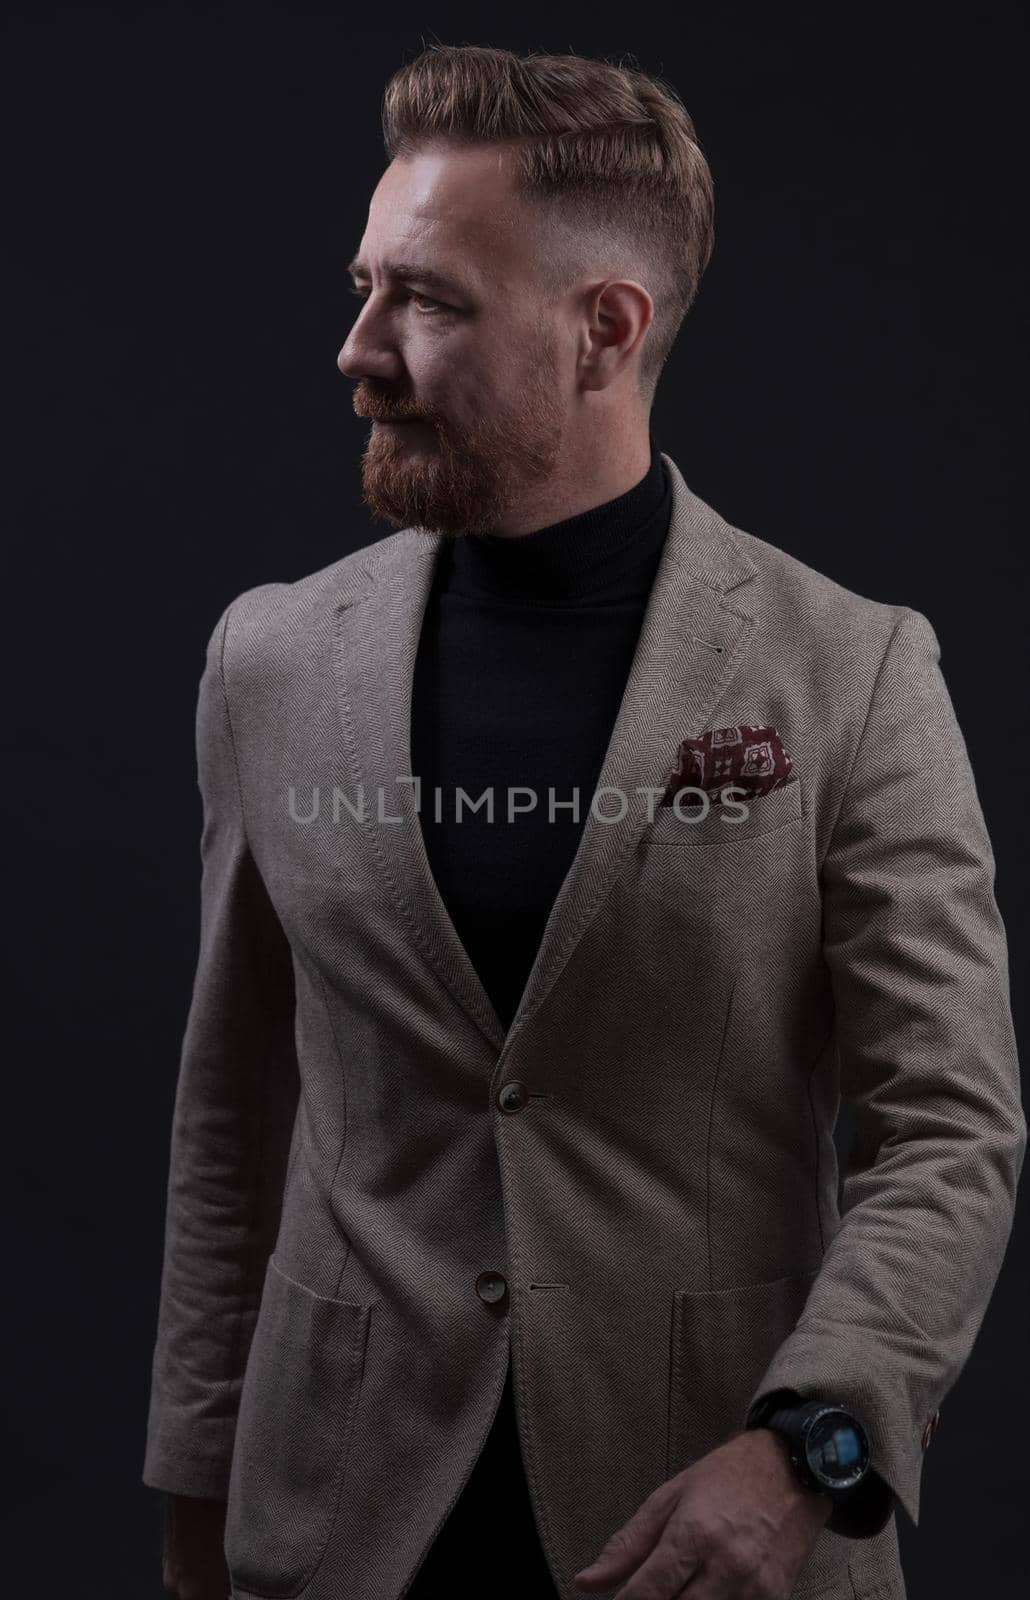 Confident businessman walking forward wearing a causal suit, handsome senior business man hero shot portrait isolated on black. High quality photo